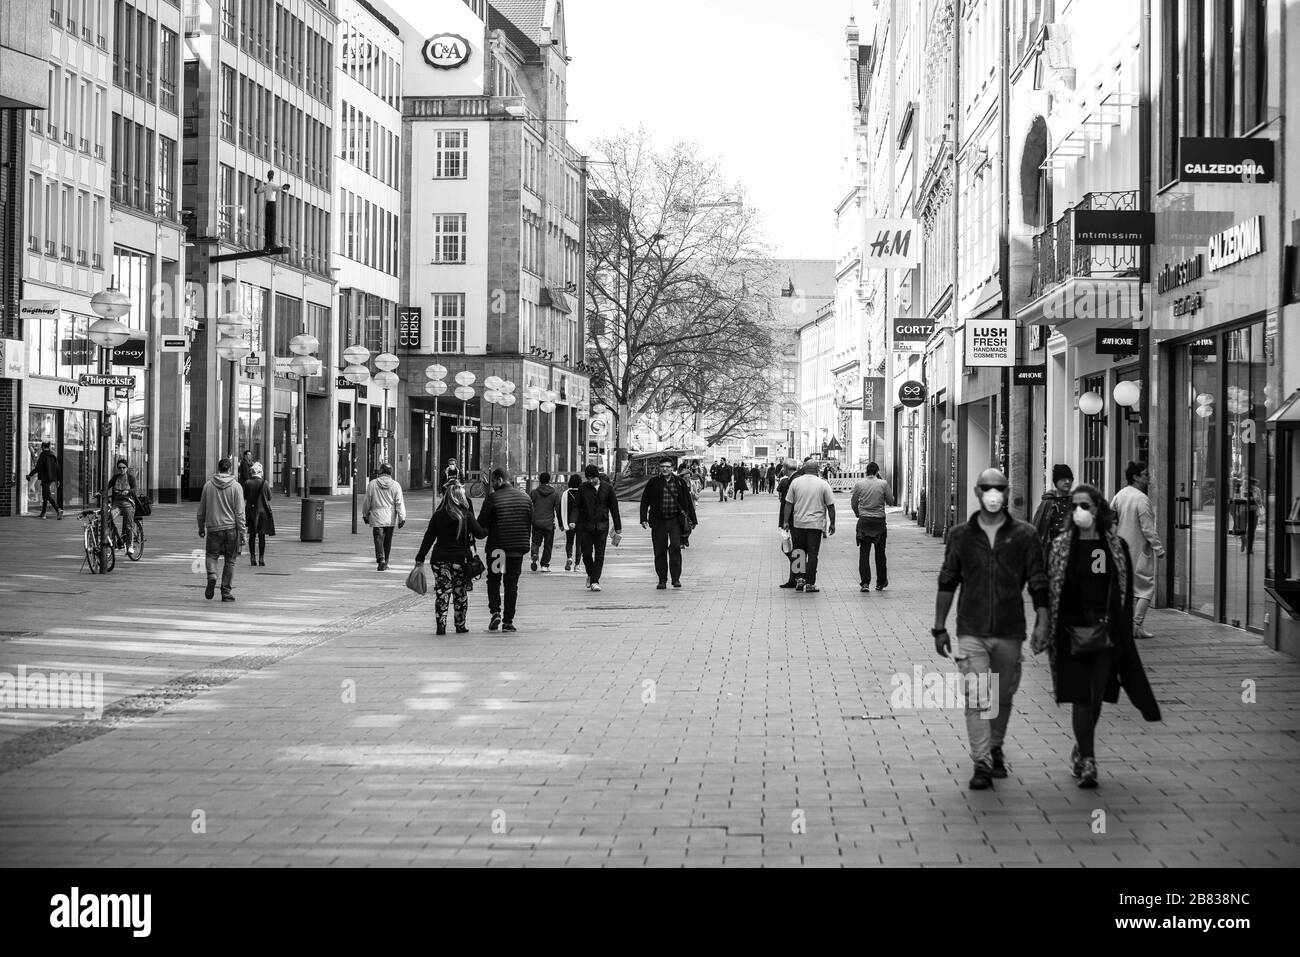 Munich, Bavaria, Germany. 19th Mar, 2020. Two tourists wear face masks in the relatively empty streets in the city center of Munich, Germany. Ordinarily, these streets are filled with tens of thousands from around the world. As a response to the increasingly dire Coronavirus (Sars CoV 2, Covid 19), the state of Bavaria has instituted measures that restrict the operations of various types of businesses that has led to the city center, once filled with tens of thousands of tourists and residents, to become a virtual ghost town, with limited numbers of people in sight. (Credit Image: © Sachelle Stock Photo